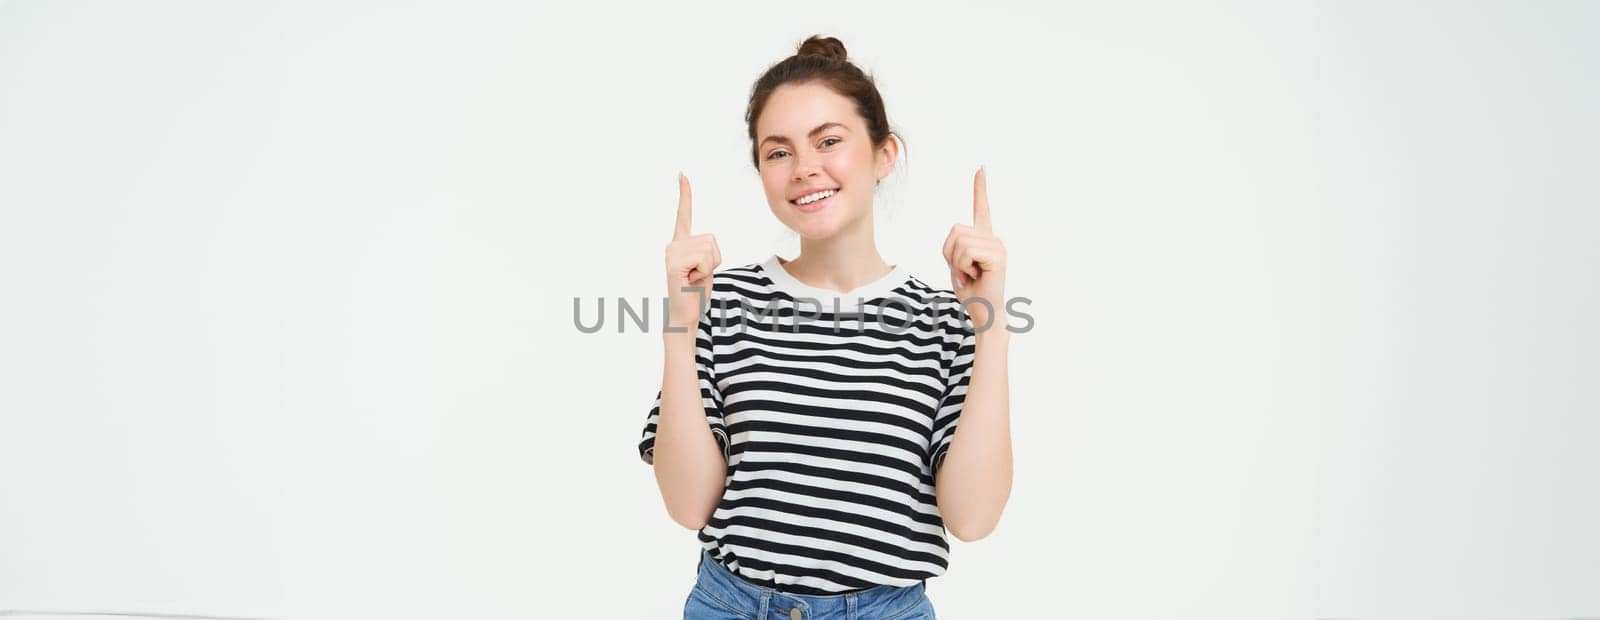 Lifestyle and advertisement concept. Young smiling woman, modern girl, pointing finger at promo, showing banner, place with text, isolated on white background.